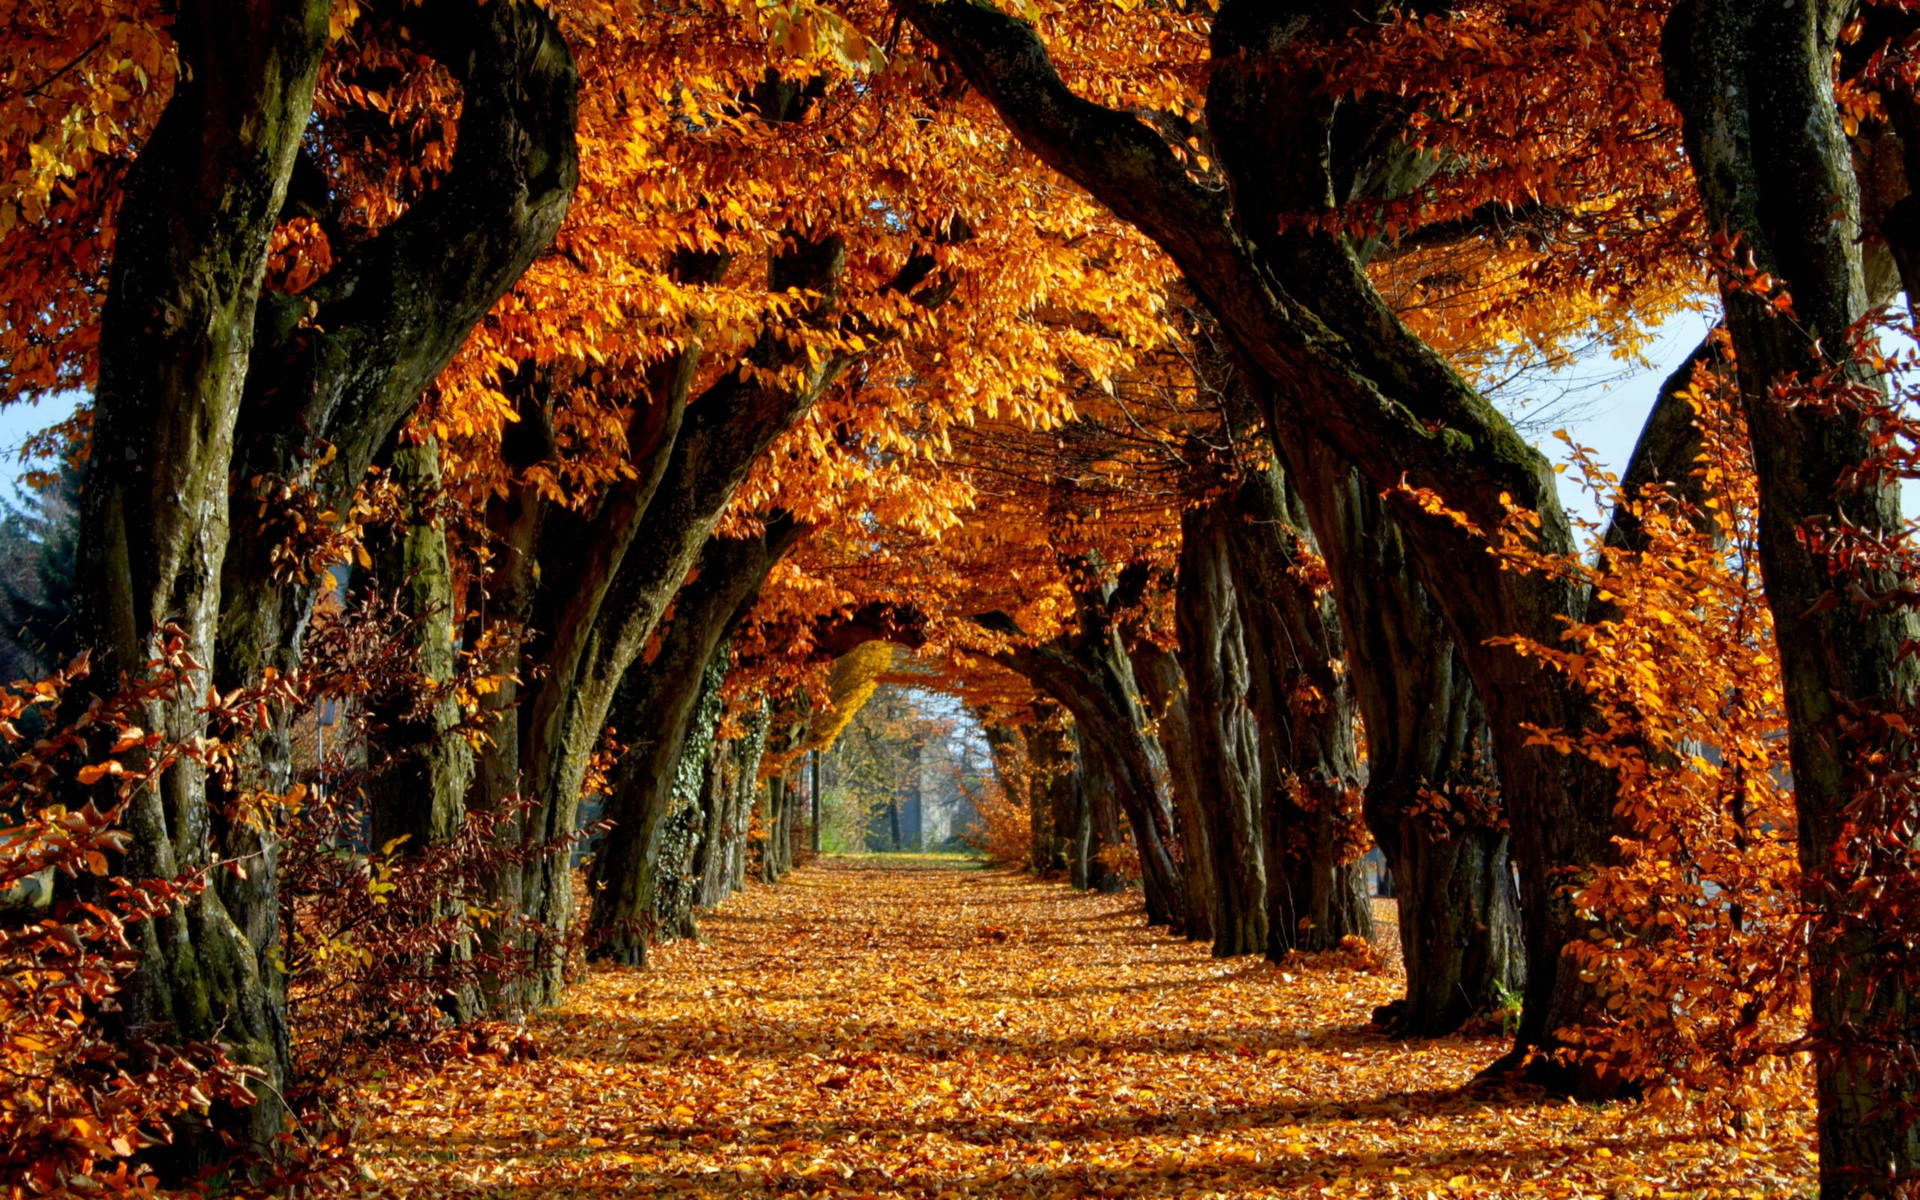 Country road in park covered with orange leaves from big hickories trees during autumn season.